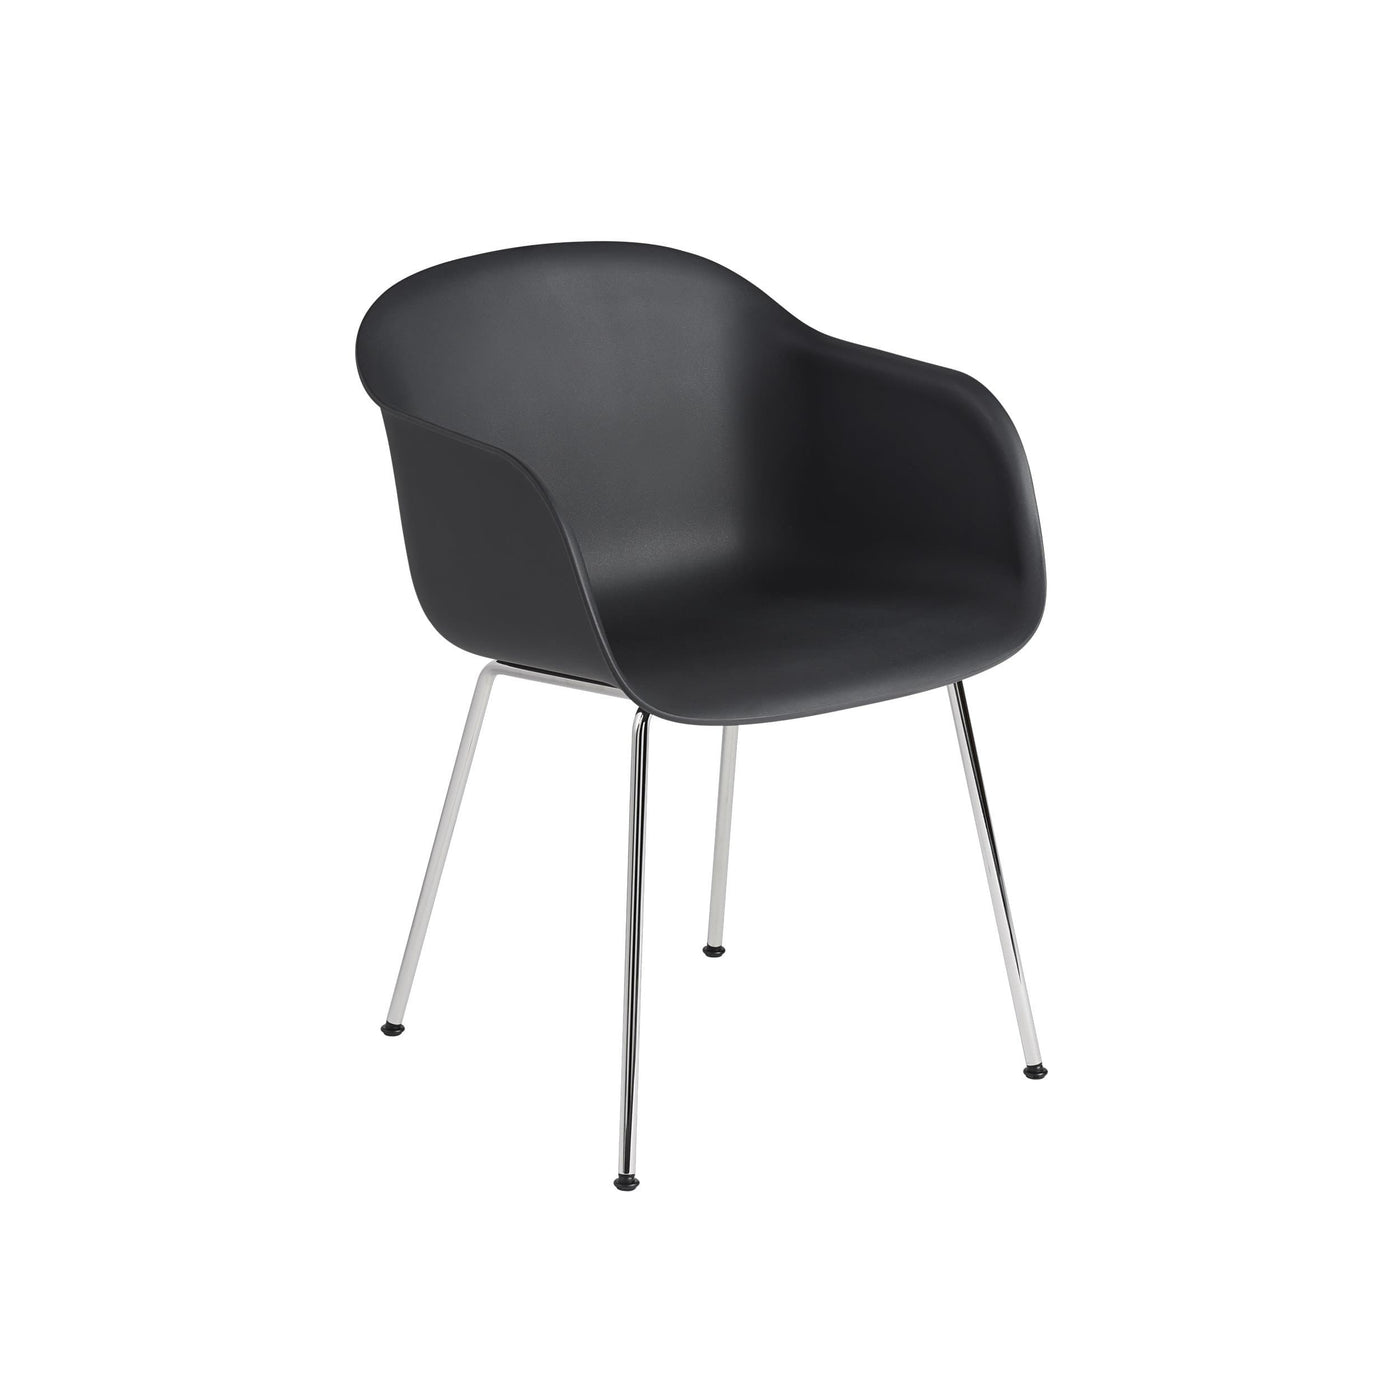 Muuto Fiber Armchair tube base in black with chrome legs. Made to order from someday designs. #colour_black